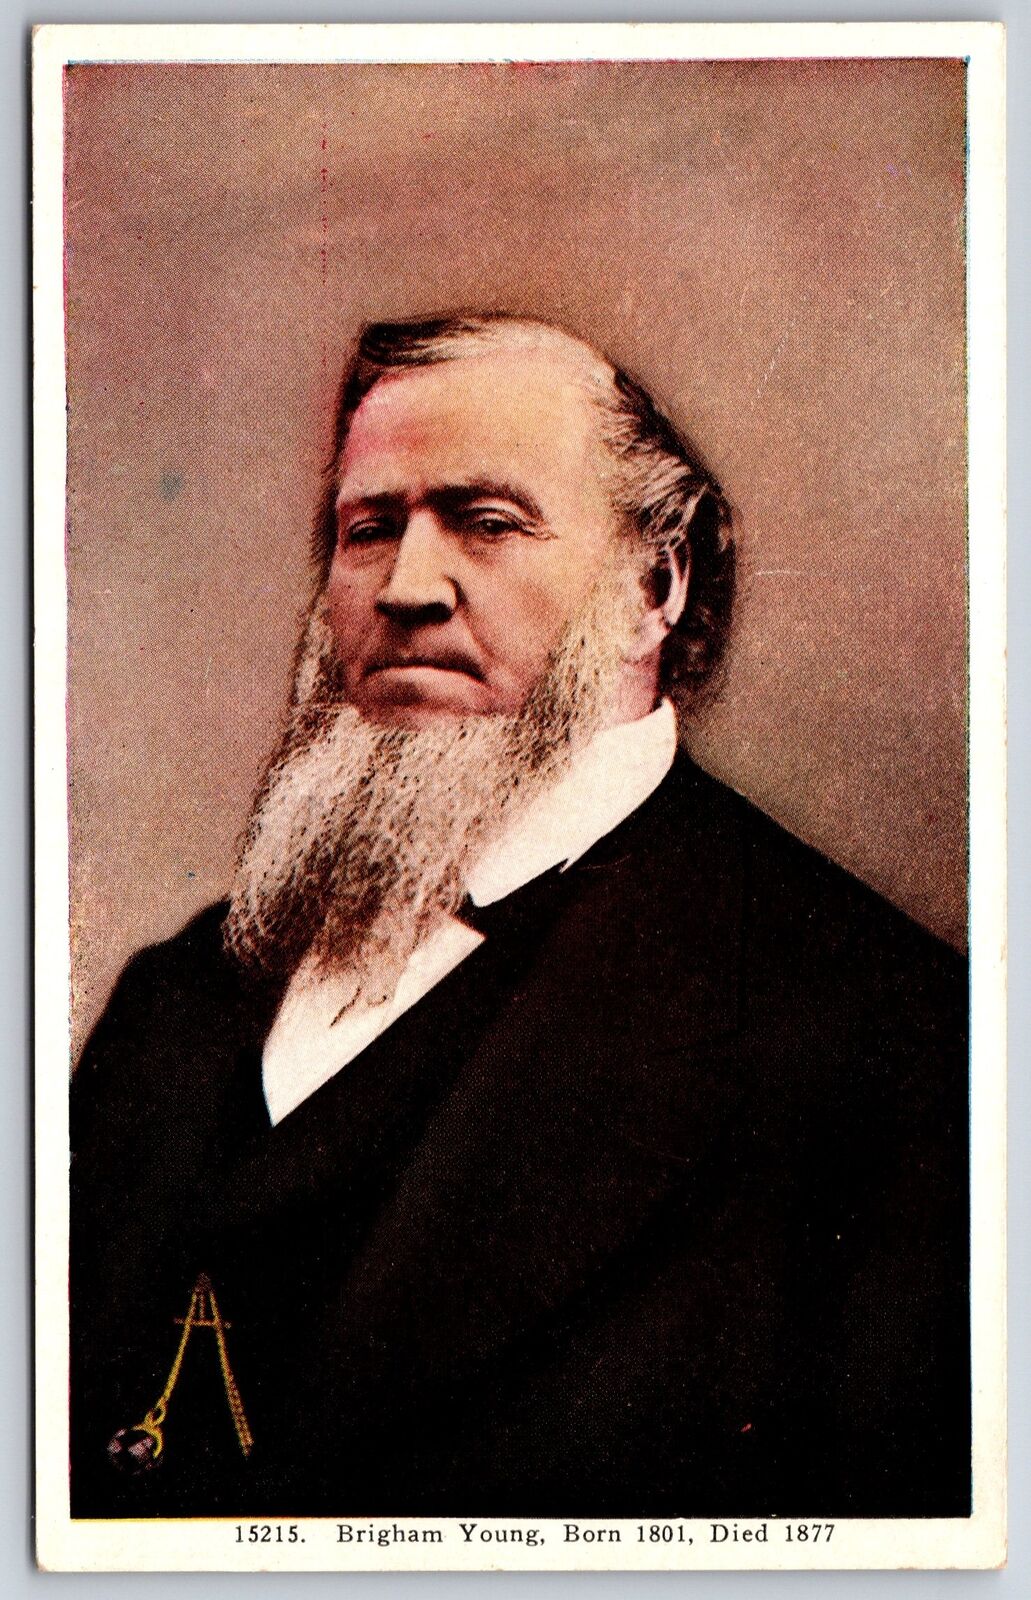 Whitingham VT Native Brigham Young~Latter Day Saints President~Nauvoo Illinois